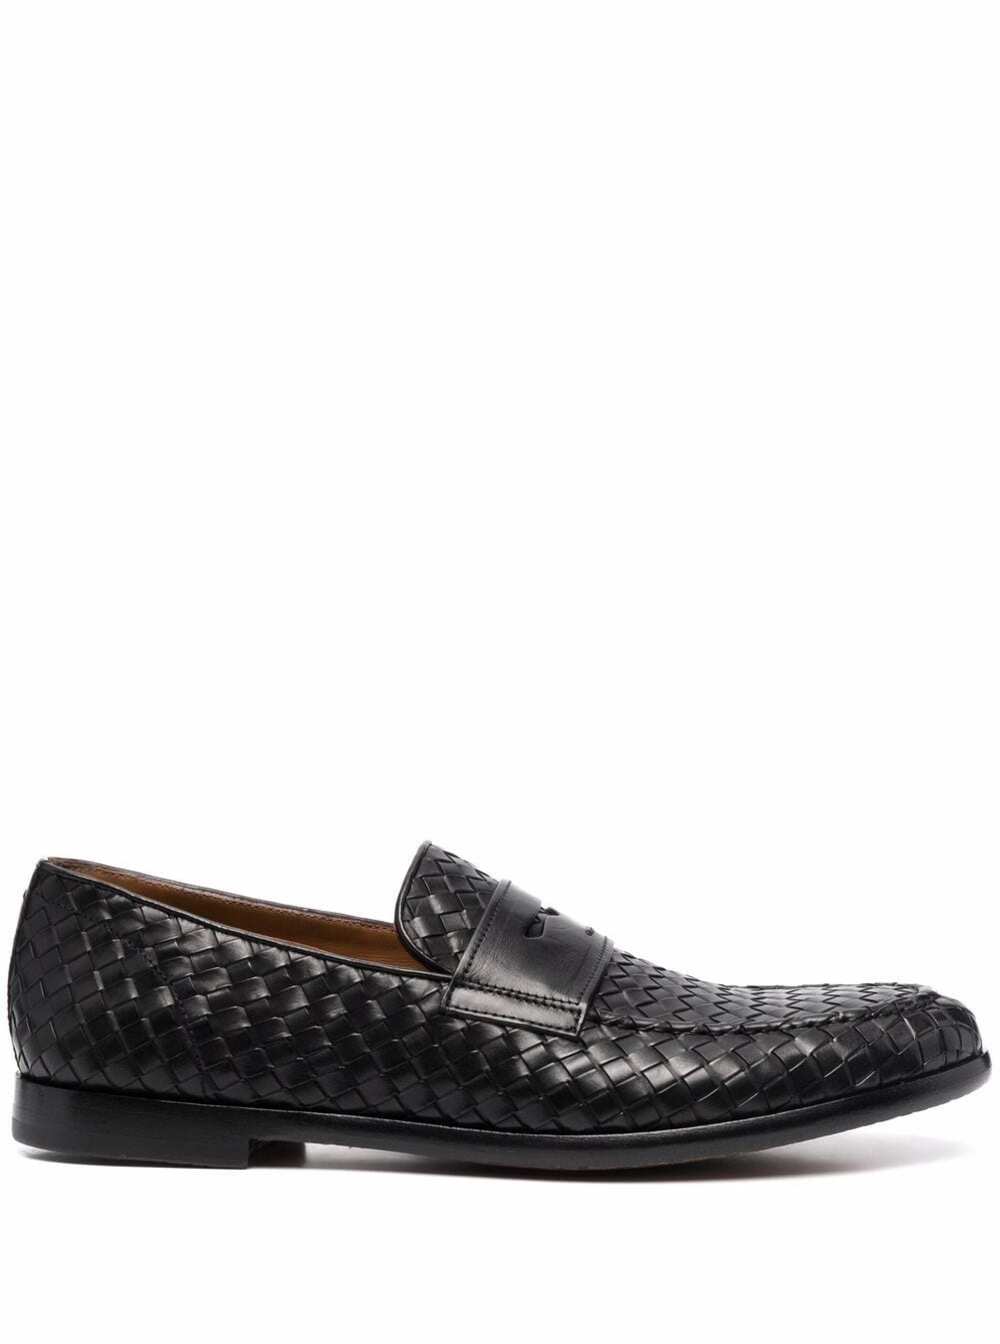 Doucal's Doucals Mans Penny Black Woven Leather Loafers